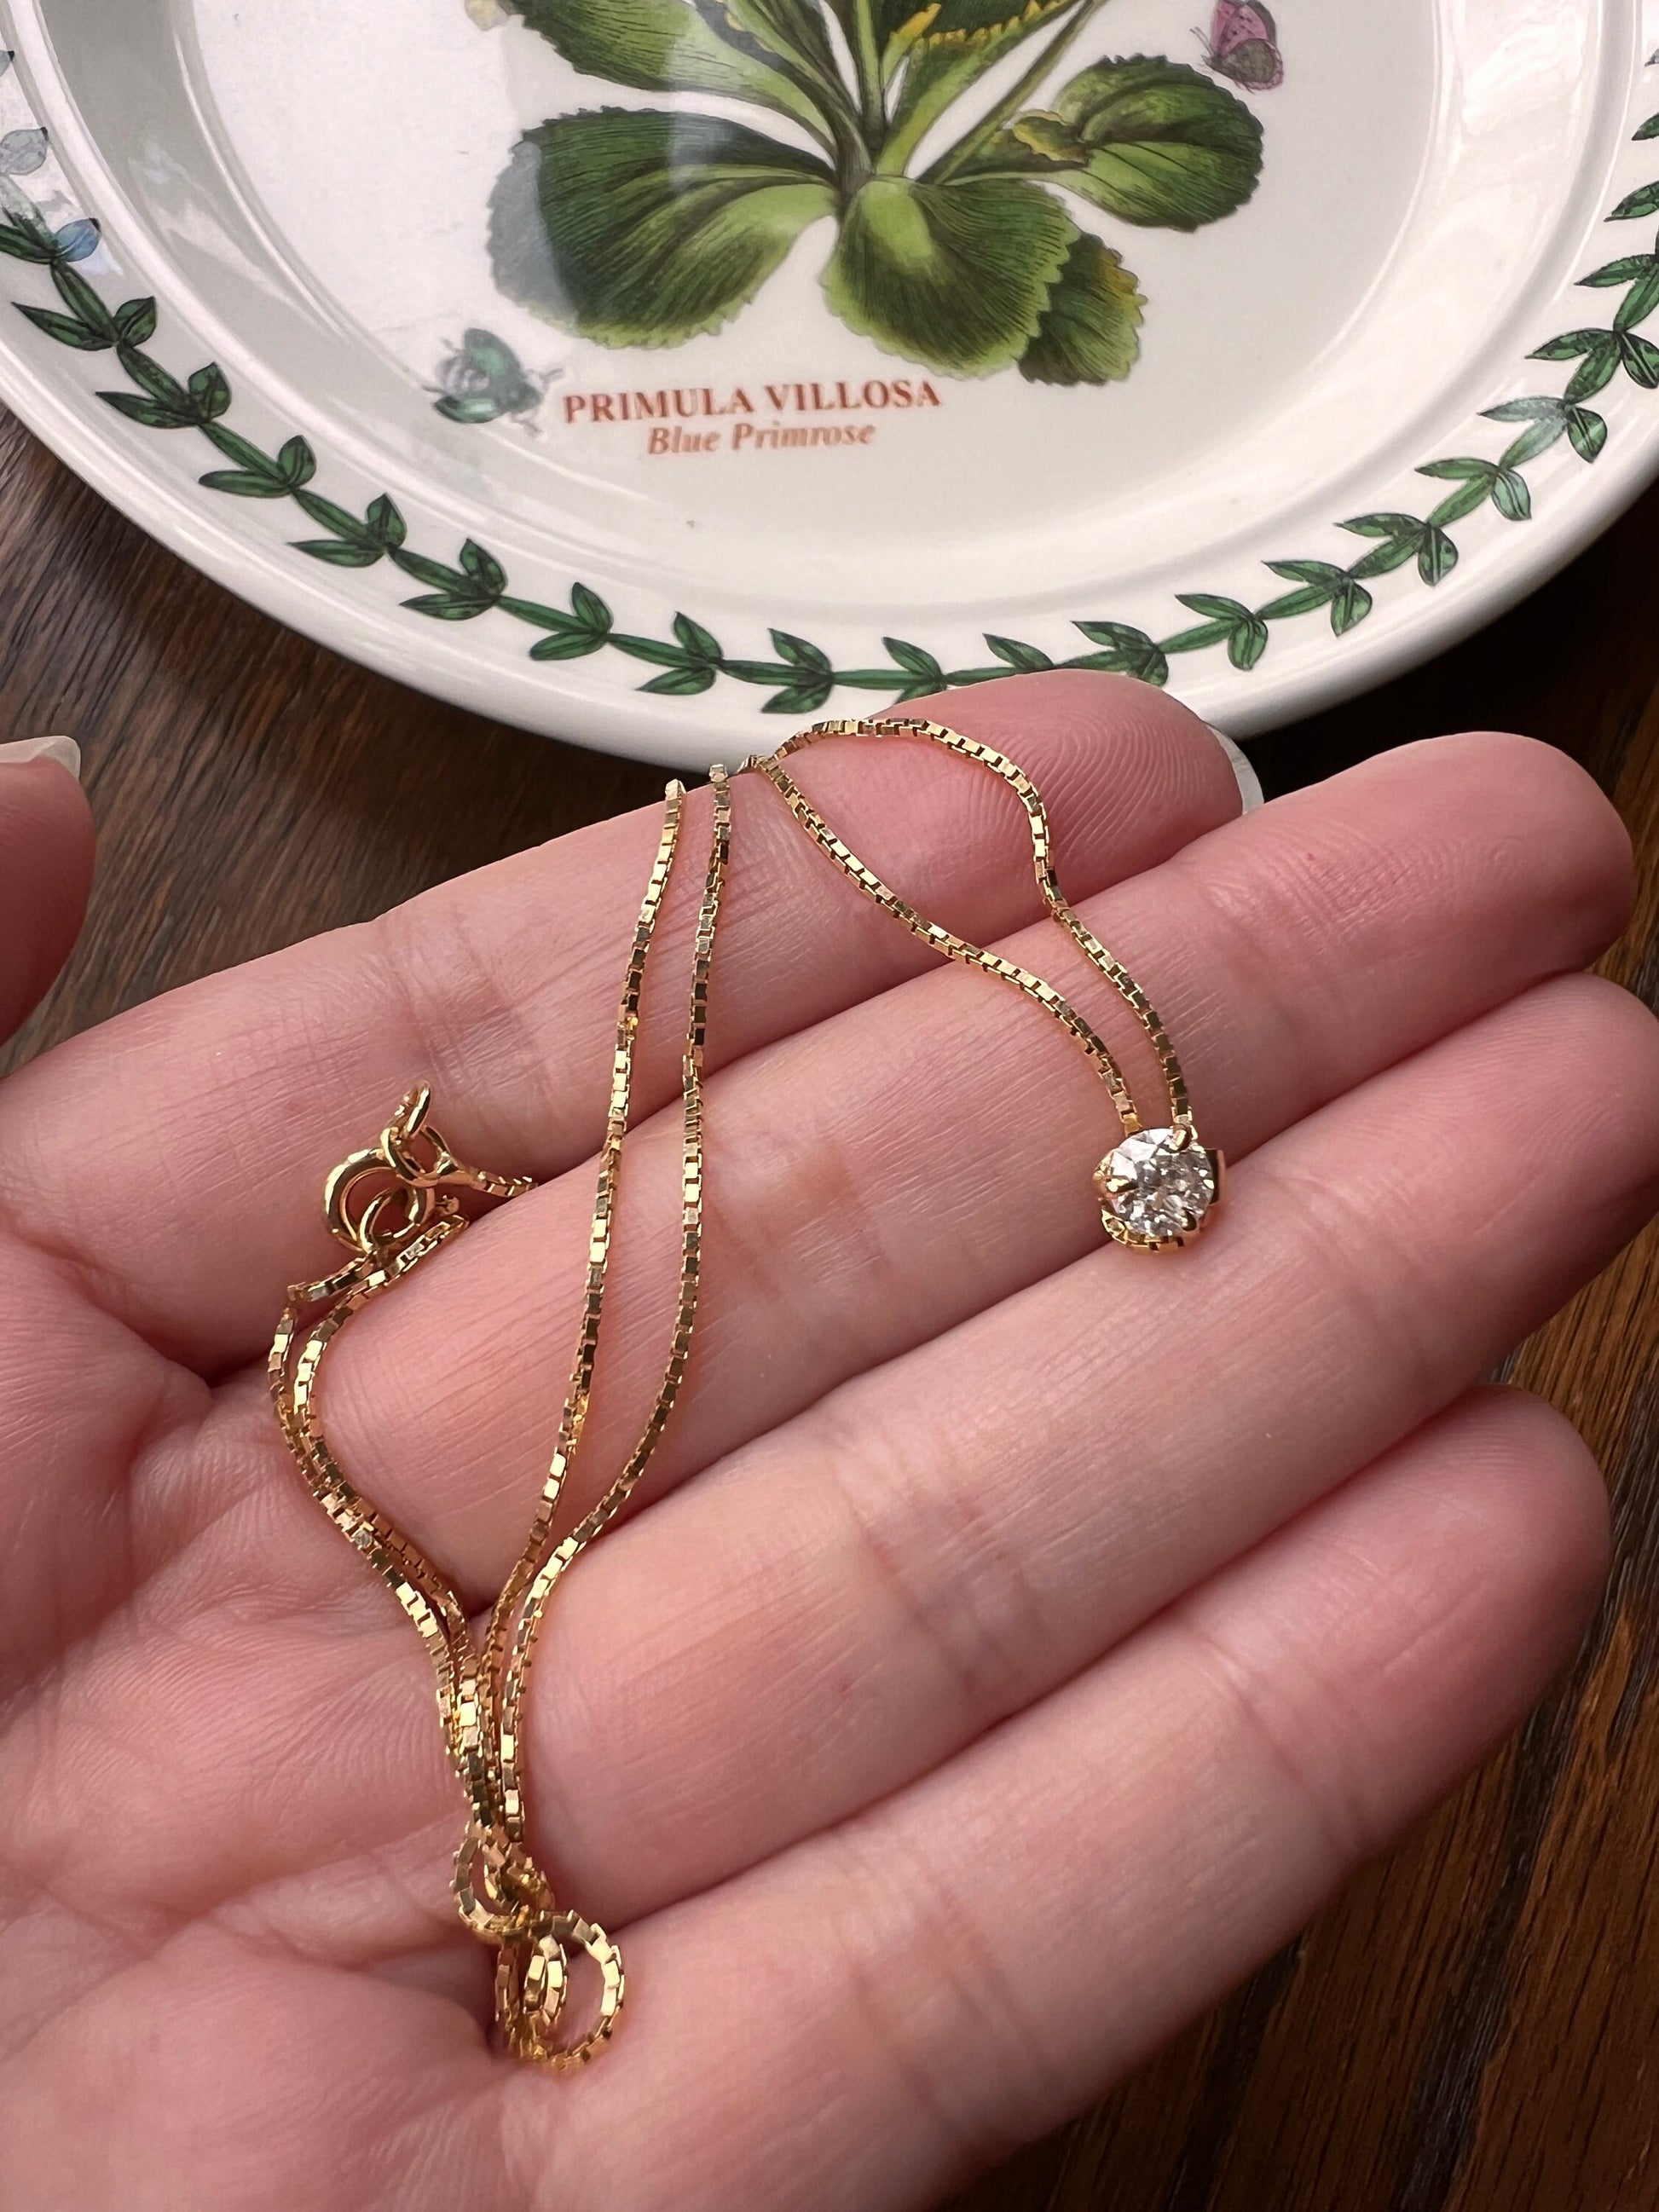 French Vintage .3 Carat Old European Cut DIAMOND Solitaire Necklace Pendant 18k Gold Shimmer Snake Chain Antique Stone Minimalist Dainty OEC